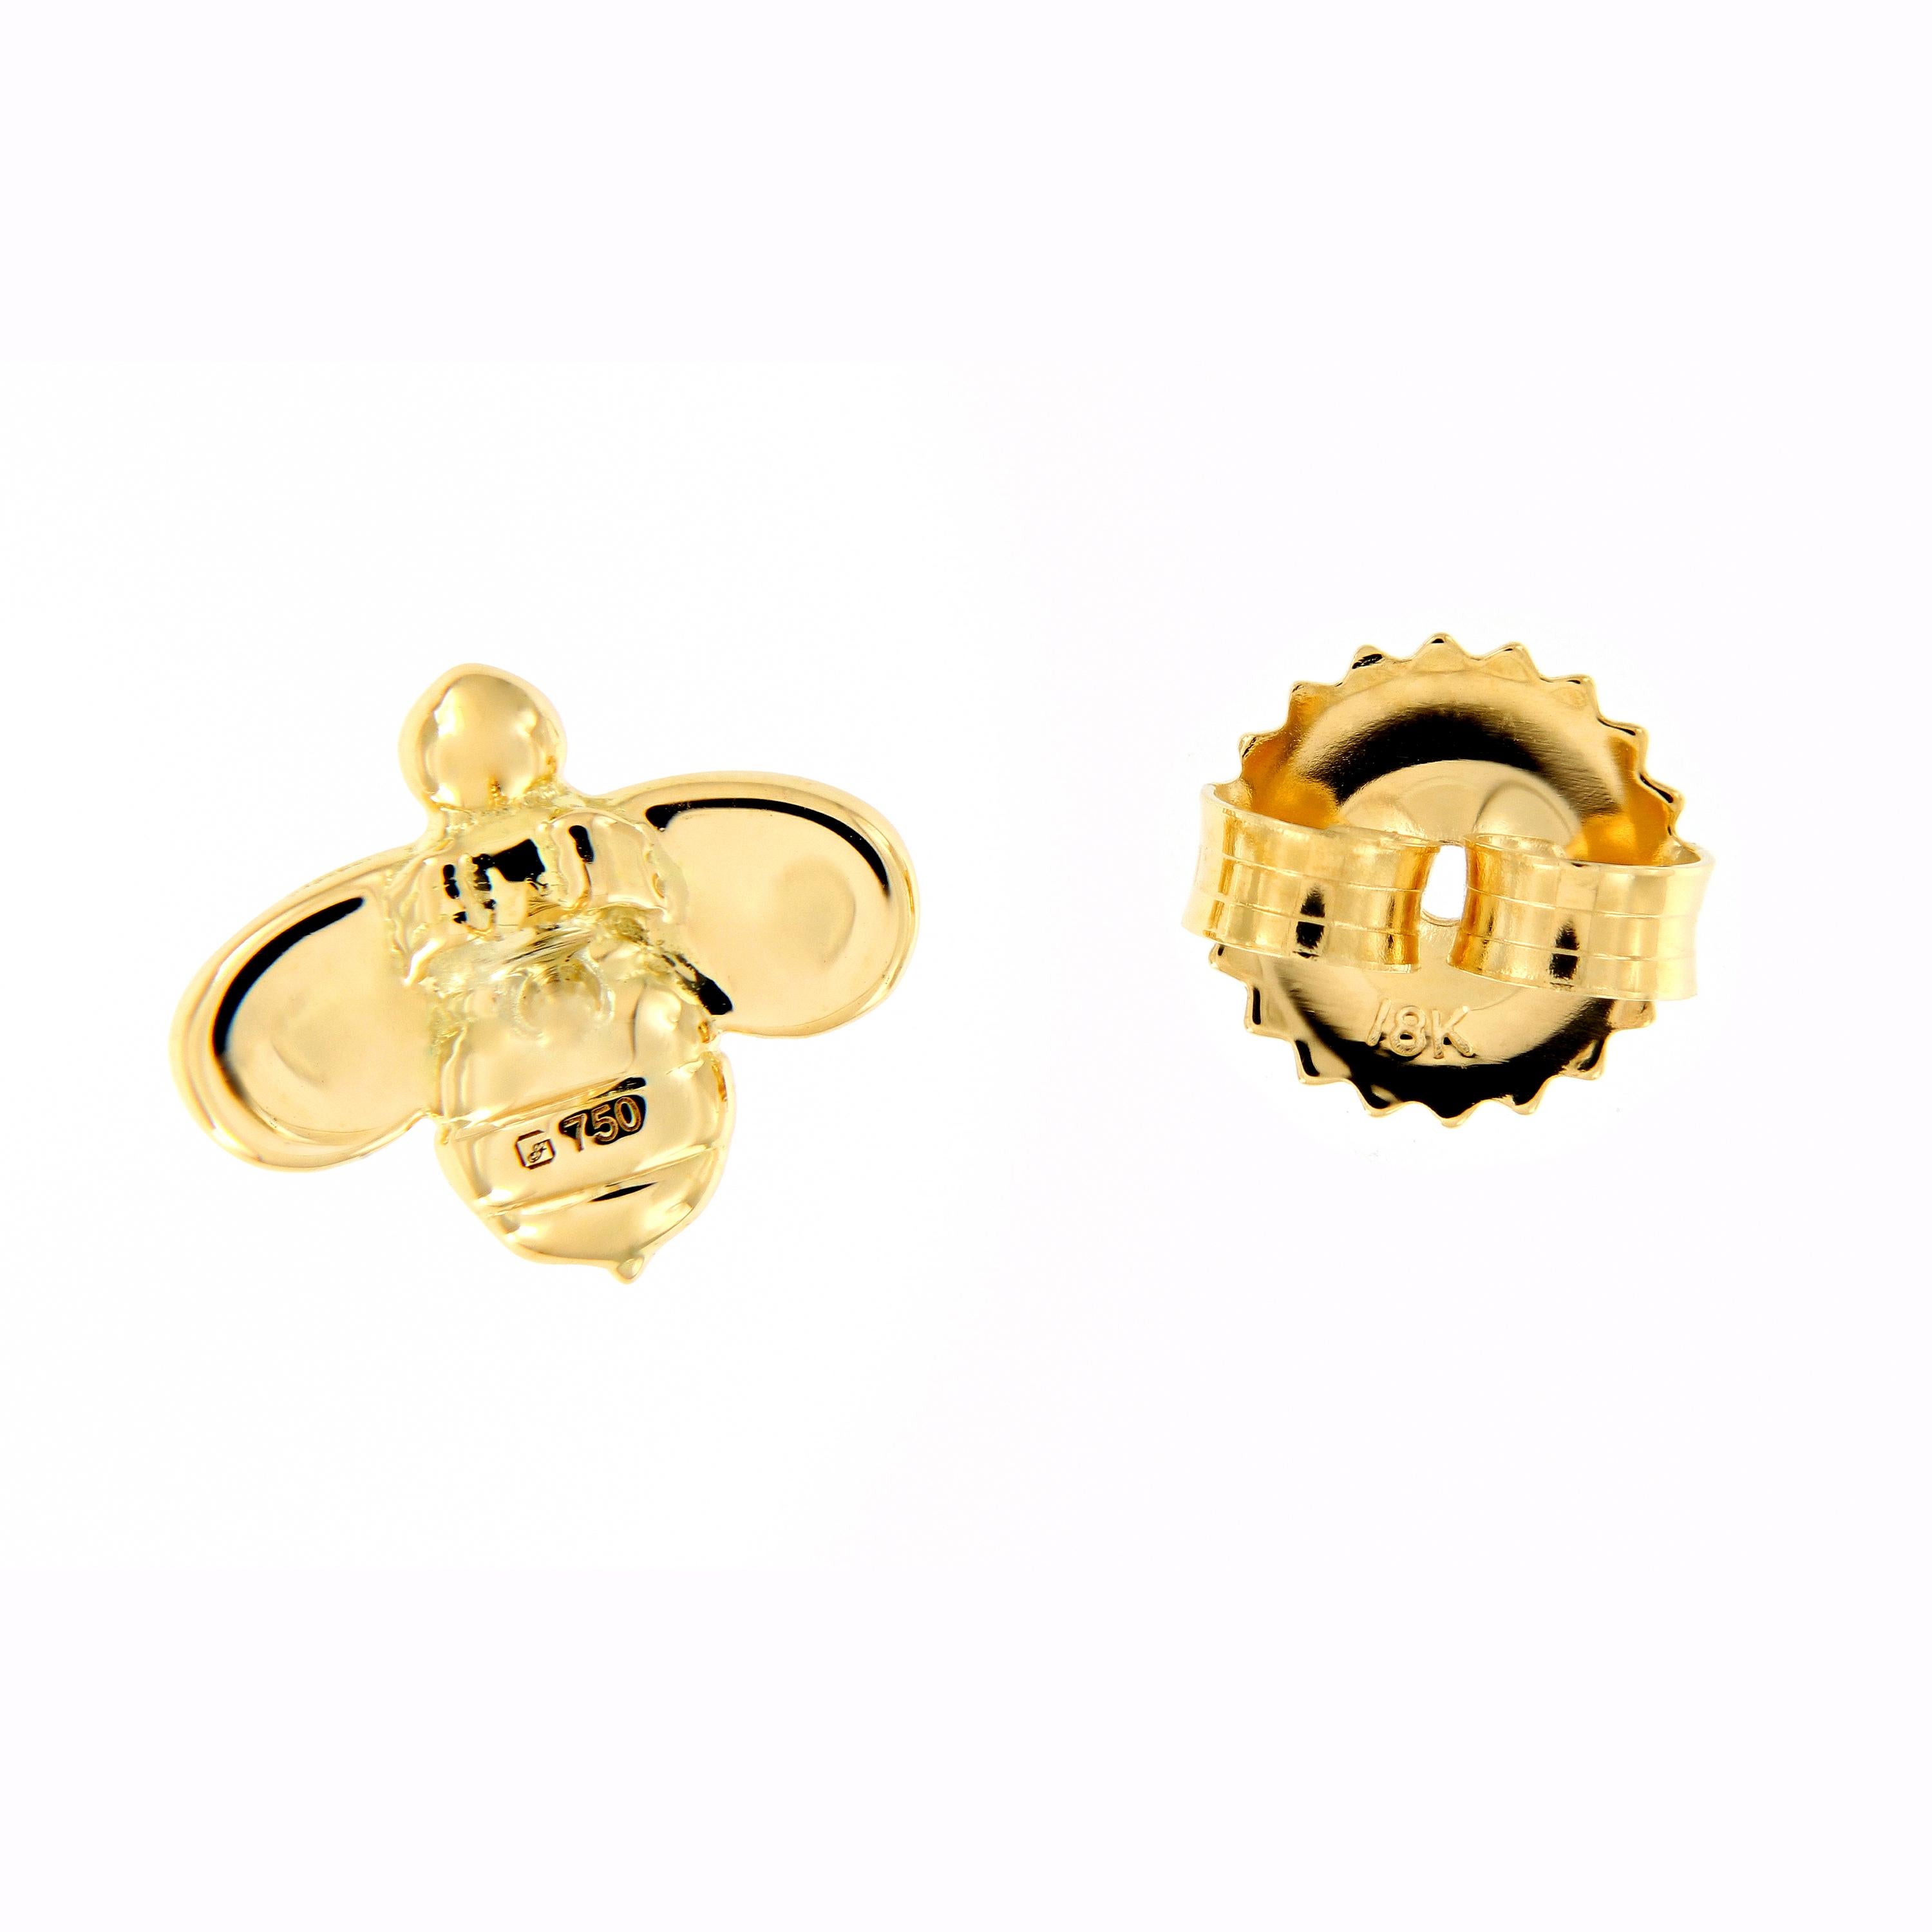 These sweet little earrings are crafted in 18k yellow gold with friction posts and backs. Earrings from the Honeybee “B” Collection by Gumuchian.
Weigh 2.2 grams. 10mm x 8mm.